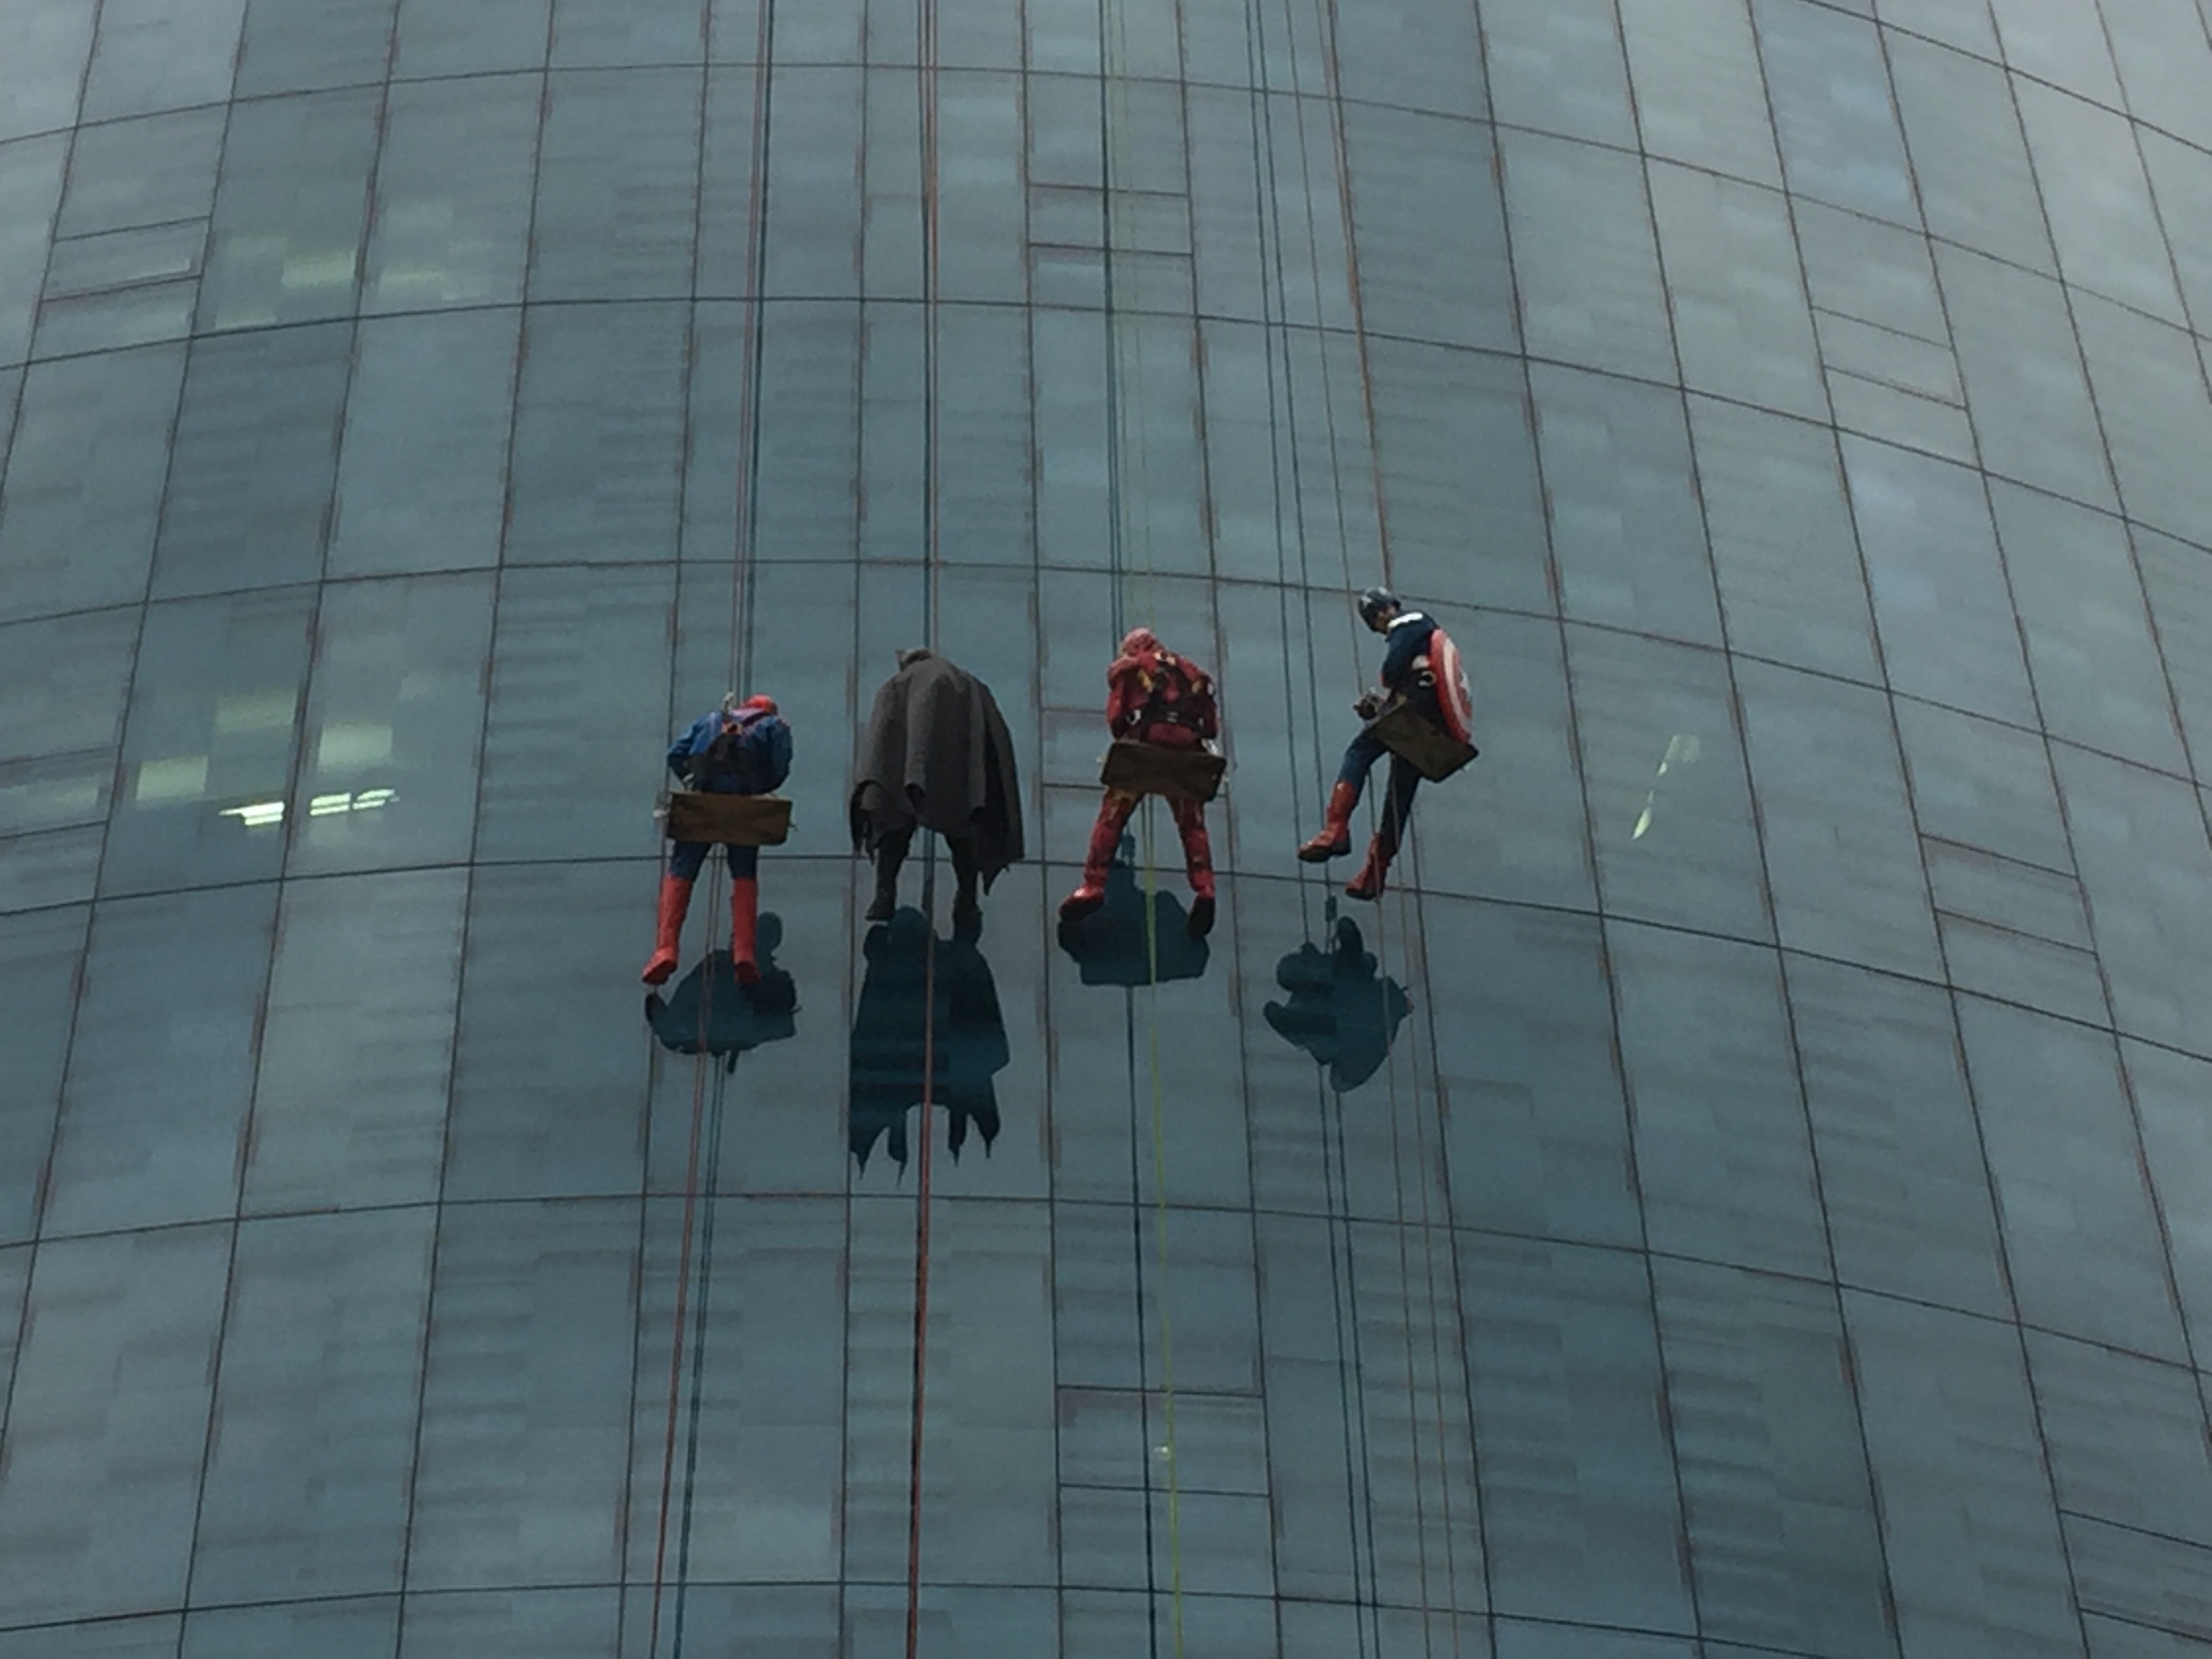 High rise window cleaners dressed as Superheroes rappel down the side of the hospital to surprise children on halloween